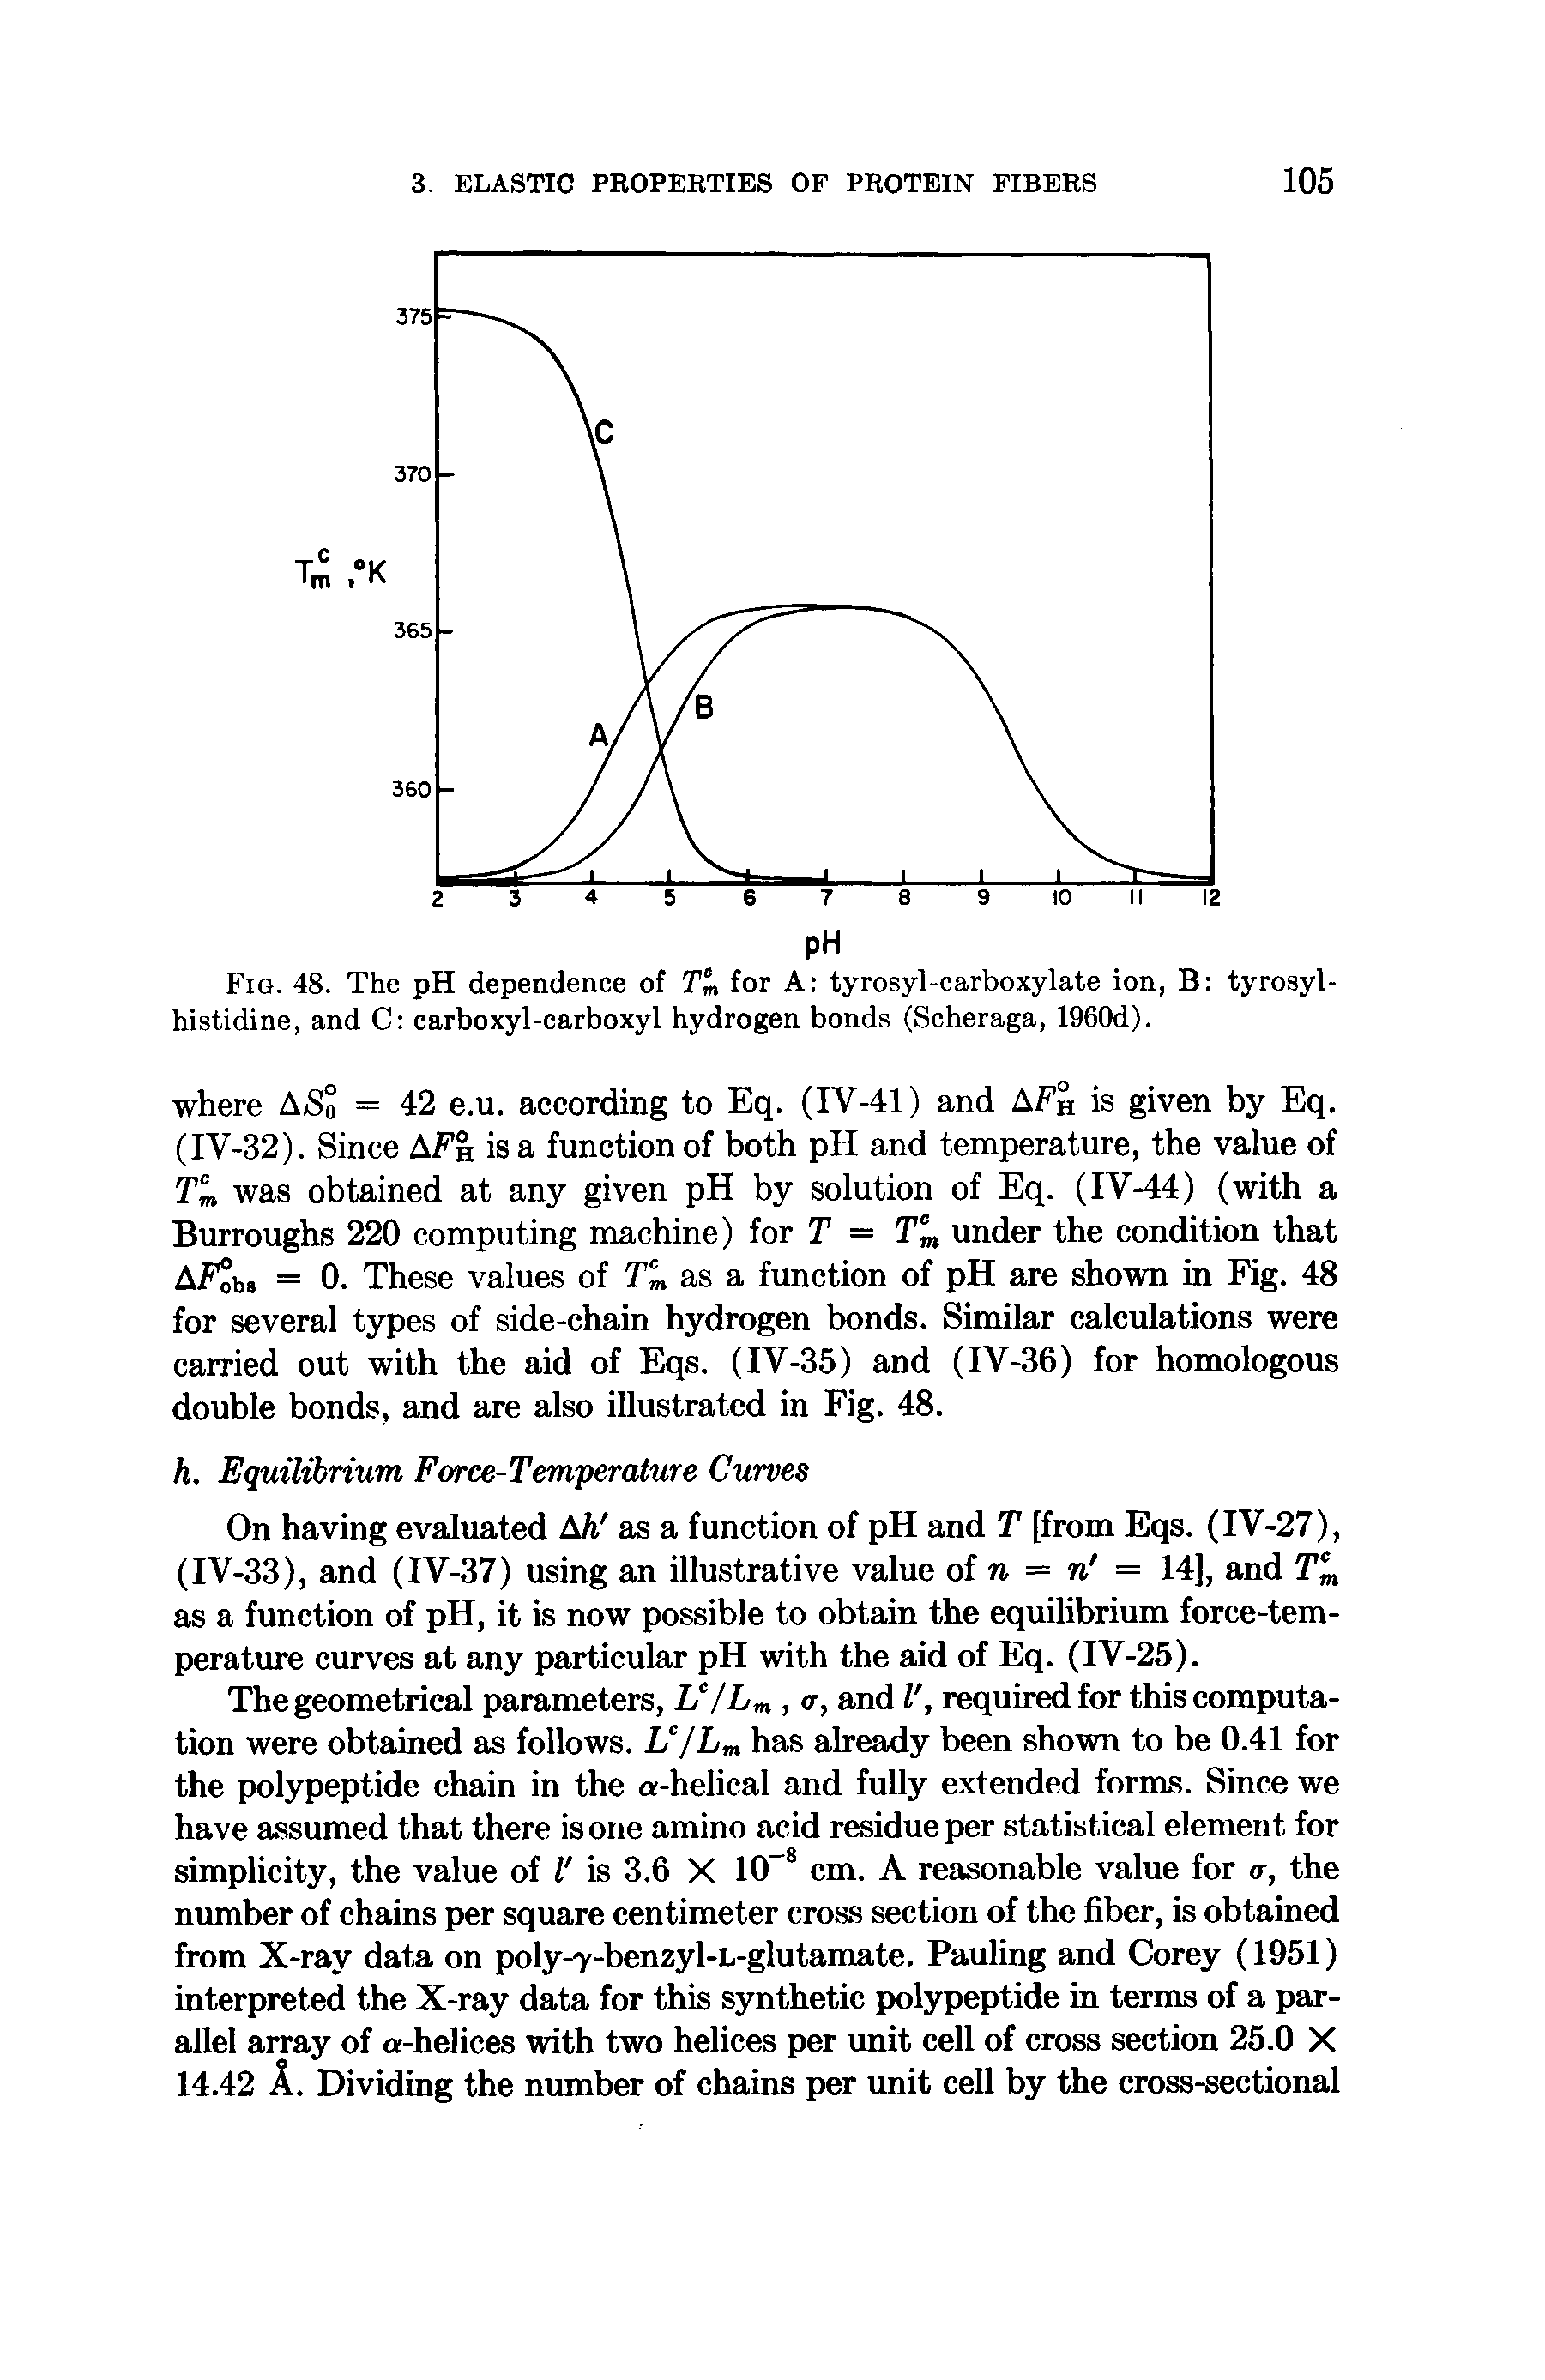 Fig. 48. The pH dependence of Tm for A tyrosyl-carboxylate ion, B tyrosyl-histidine, and C carboxyl-carboxyl hydrogen bonds (Scheraga, 1960d).